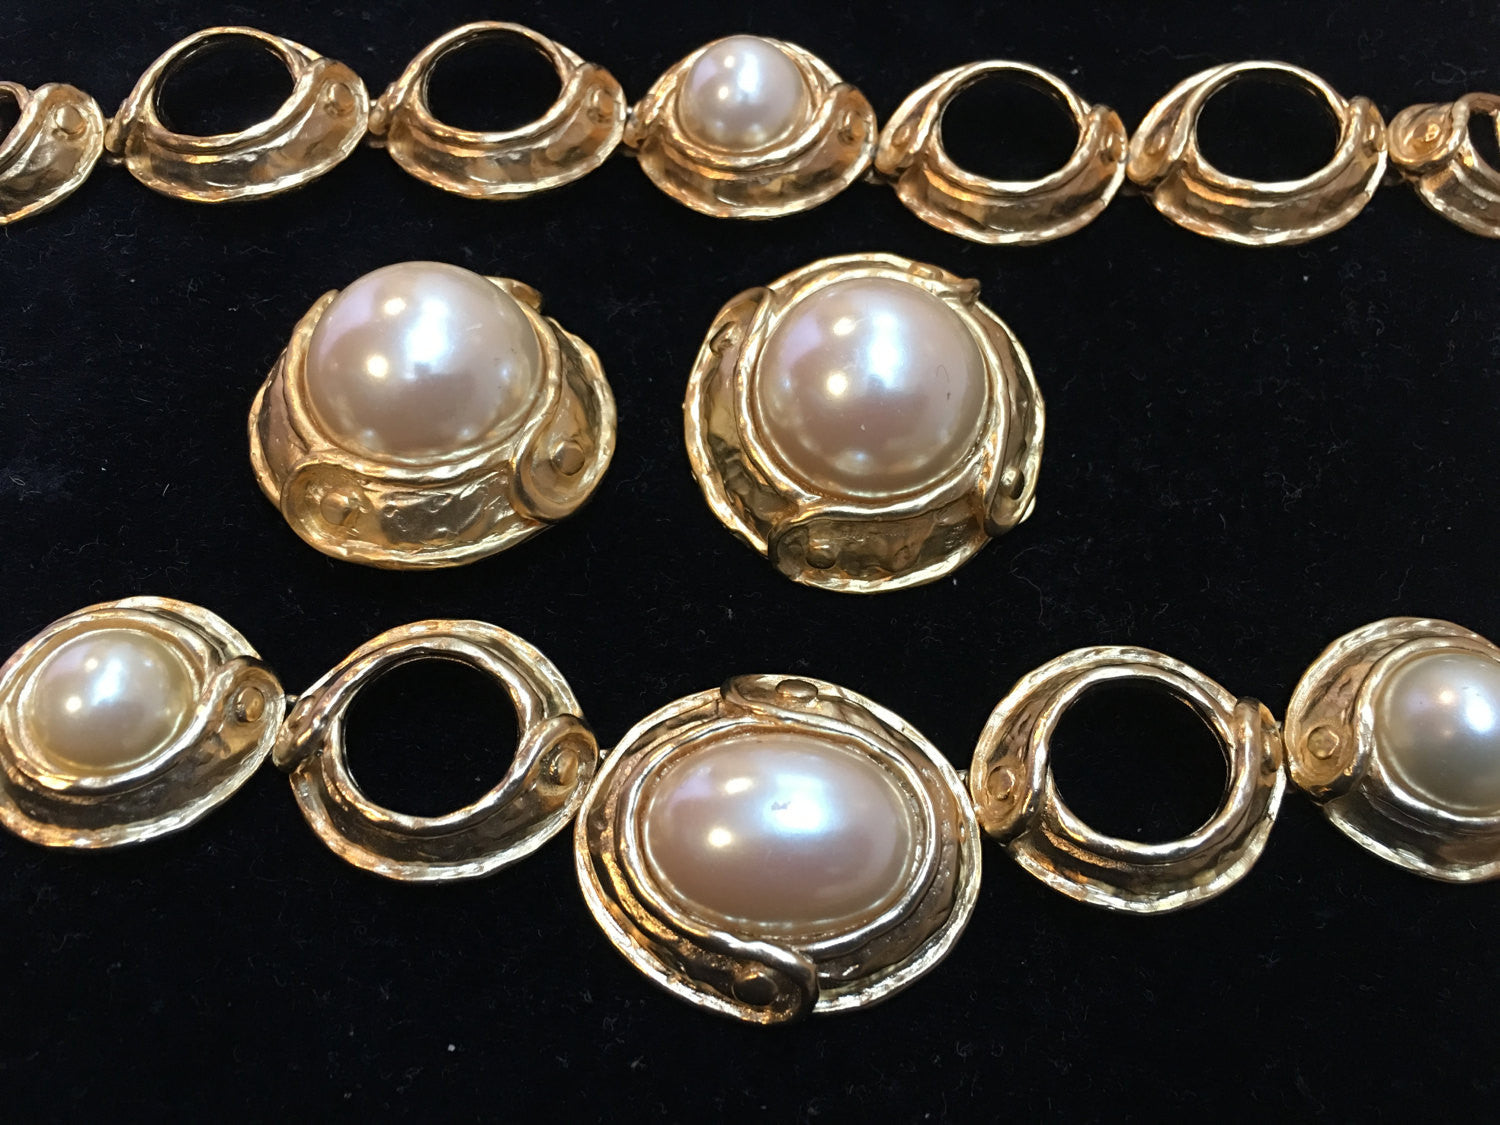 Pearl Vintage Jewelry Parure Set Necklace Bracelet and Earrings Golden Brush Pearls